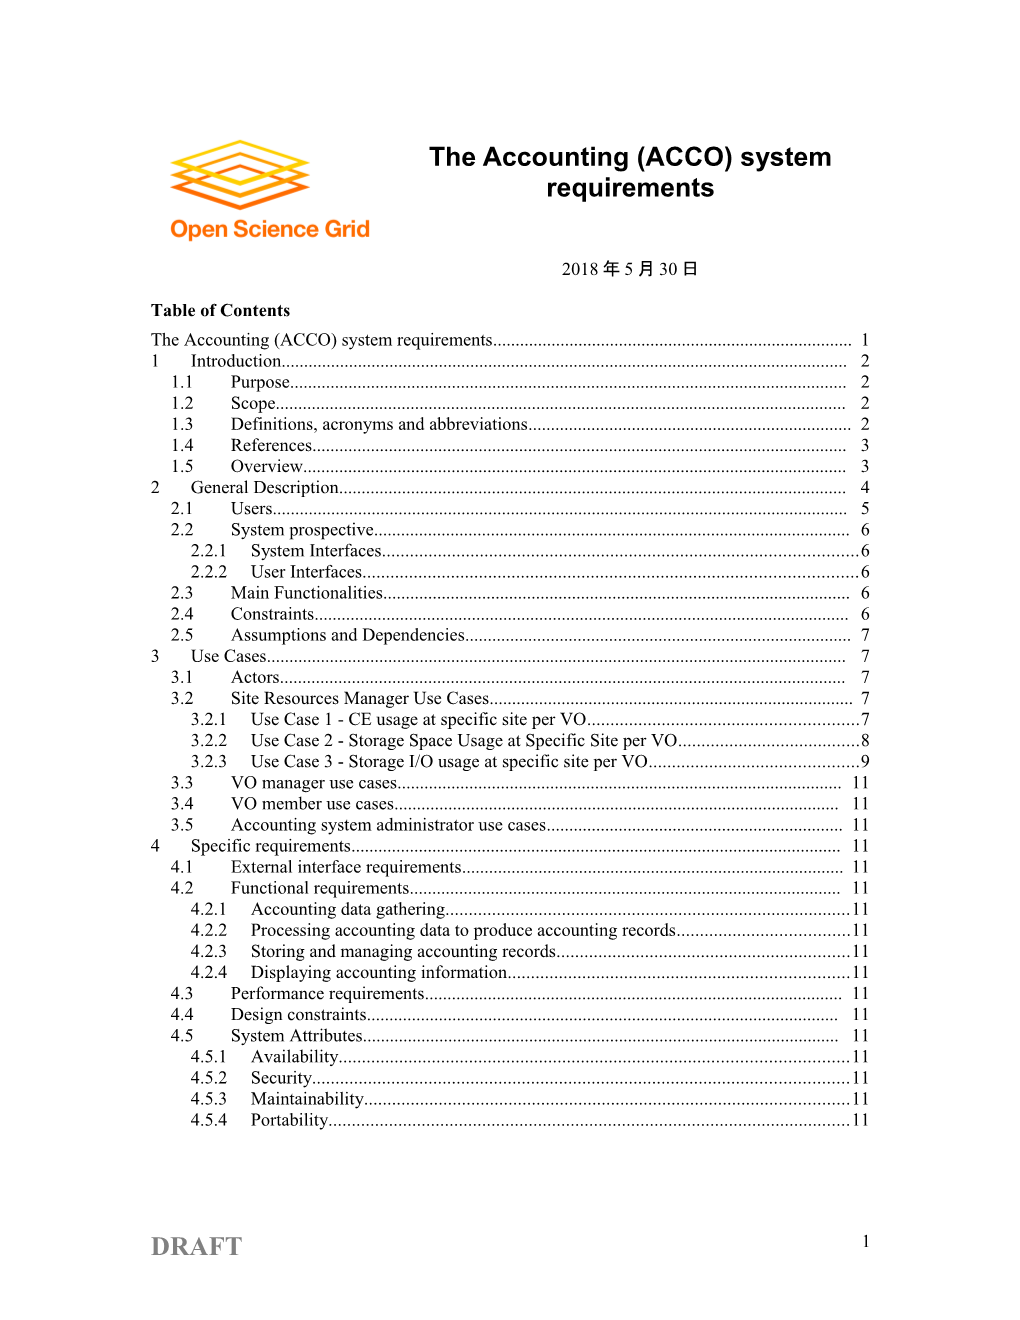 The Accounting (ACCO) System Requirements 1